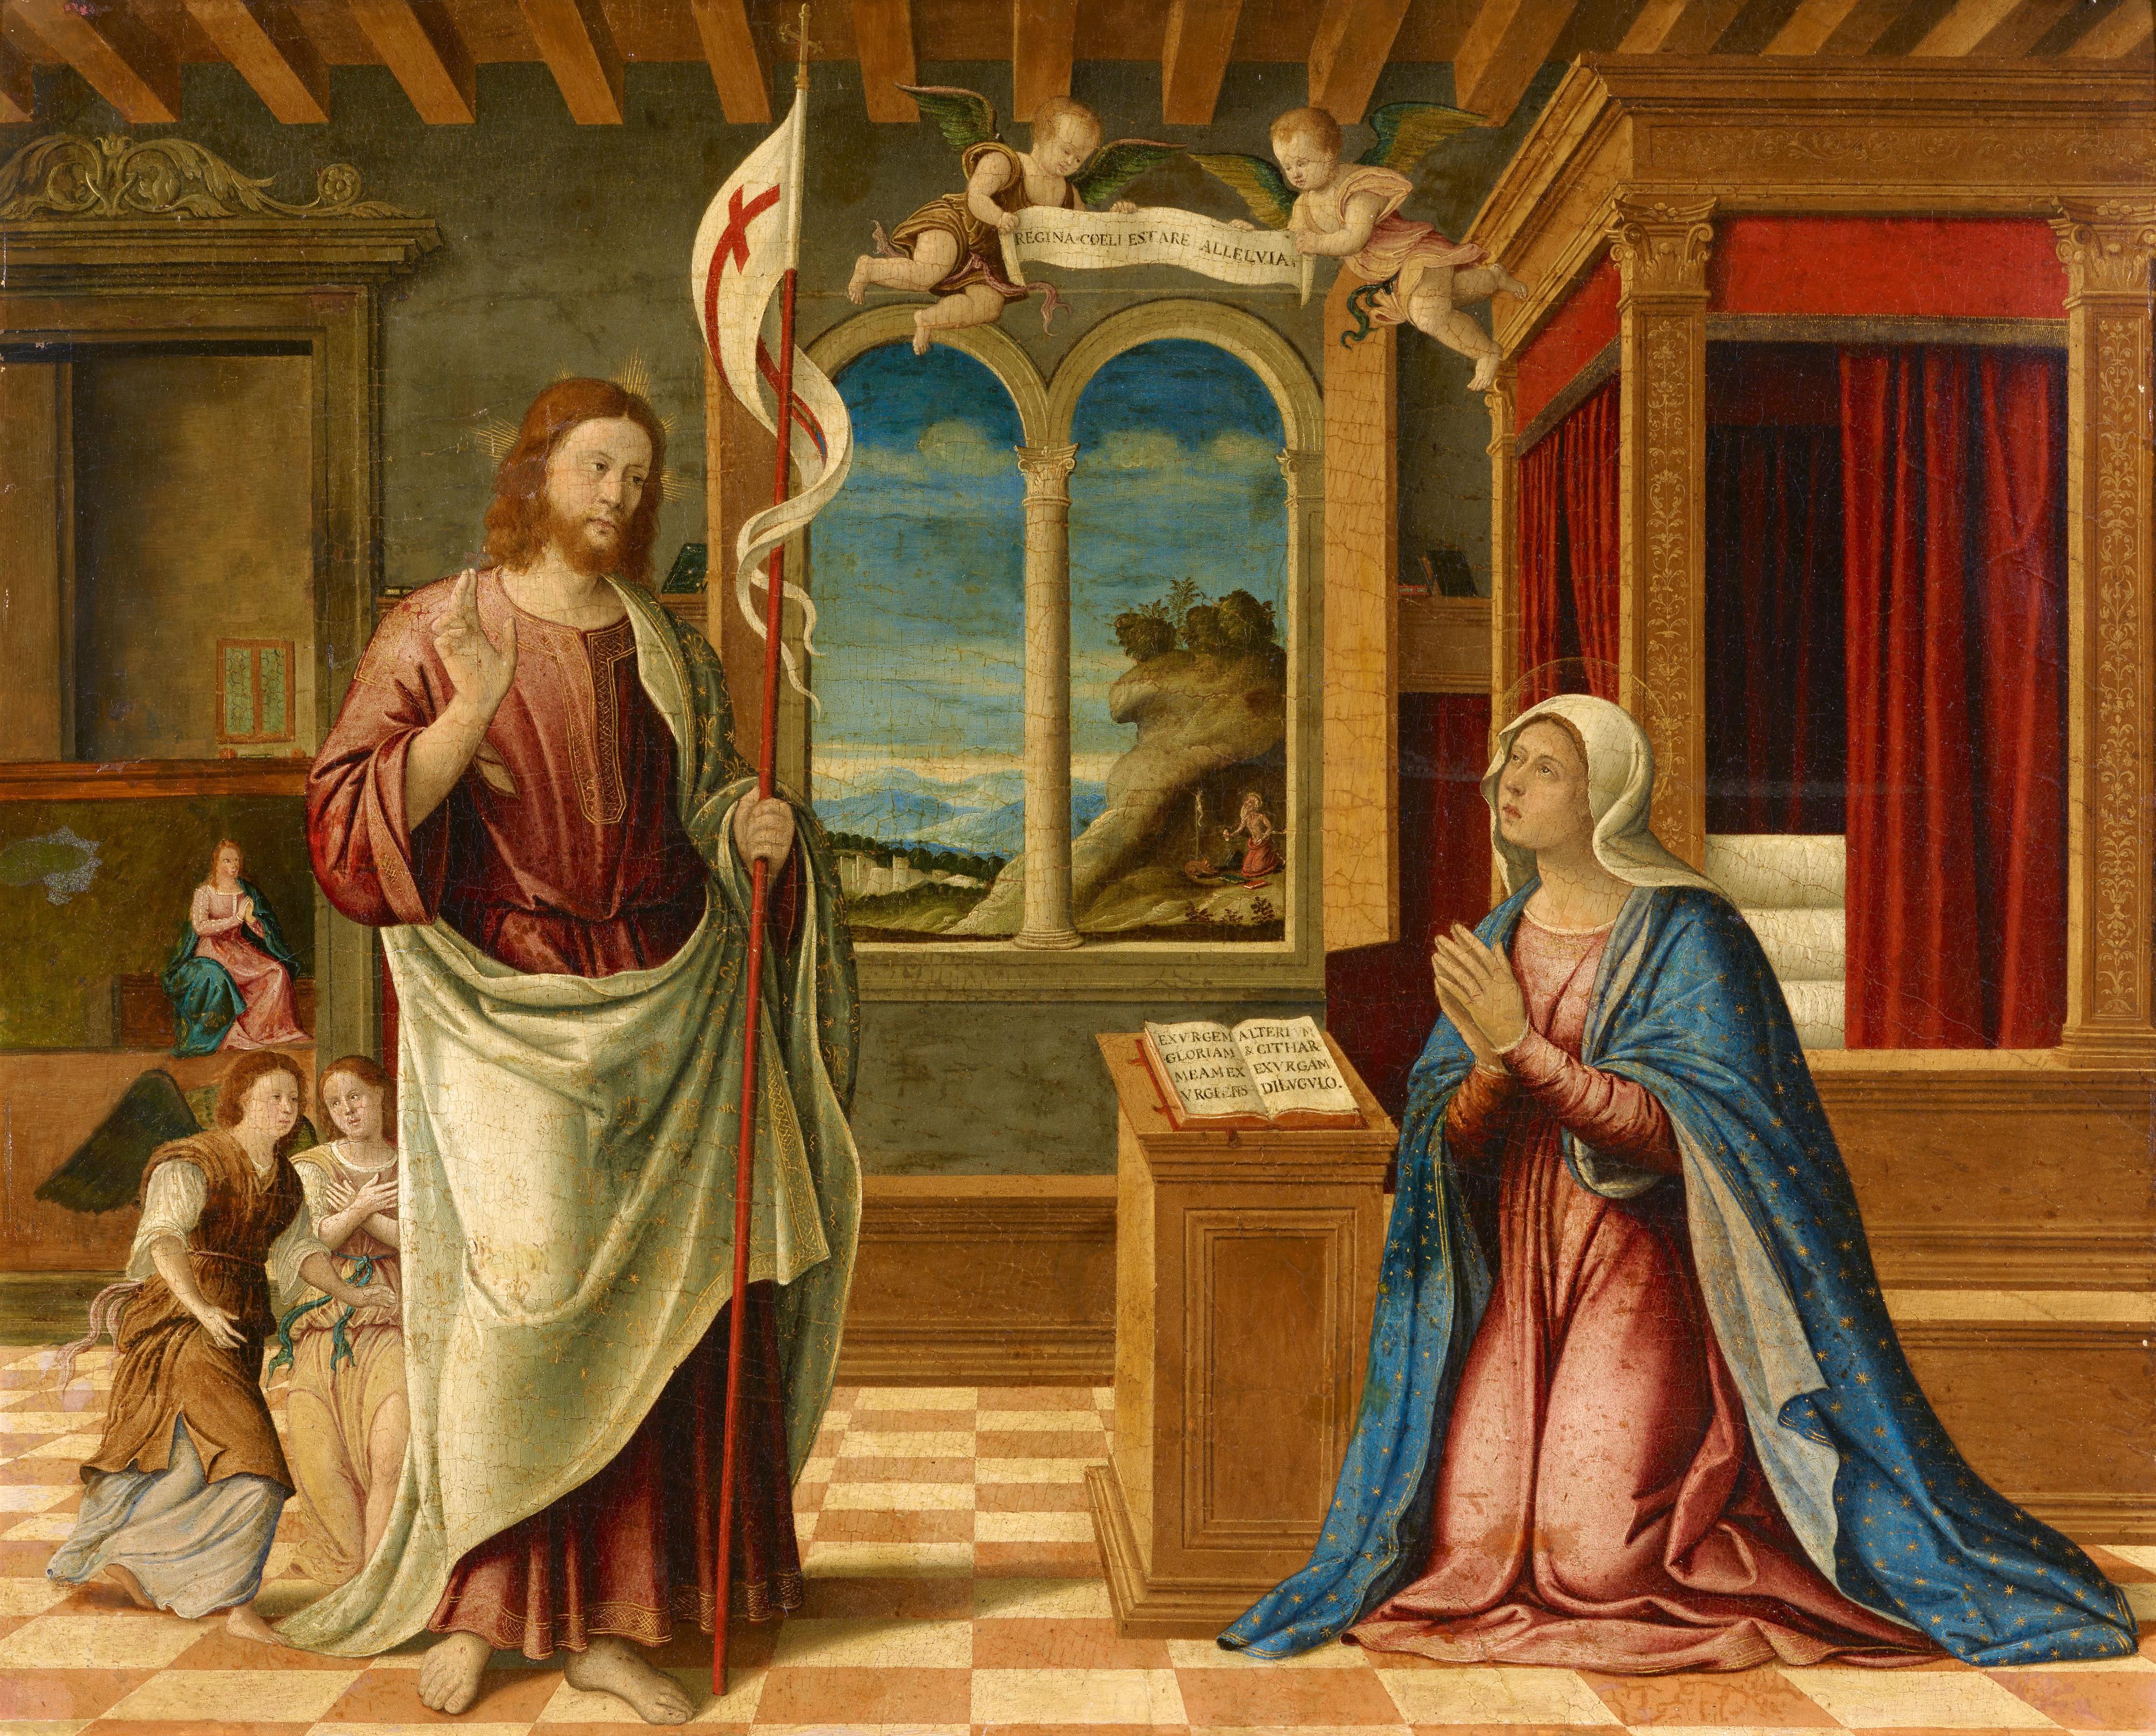 Girolamo da Santacroce, attributed to - Christ Appears to the Madonna - image-1